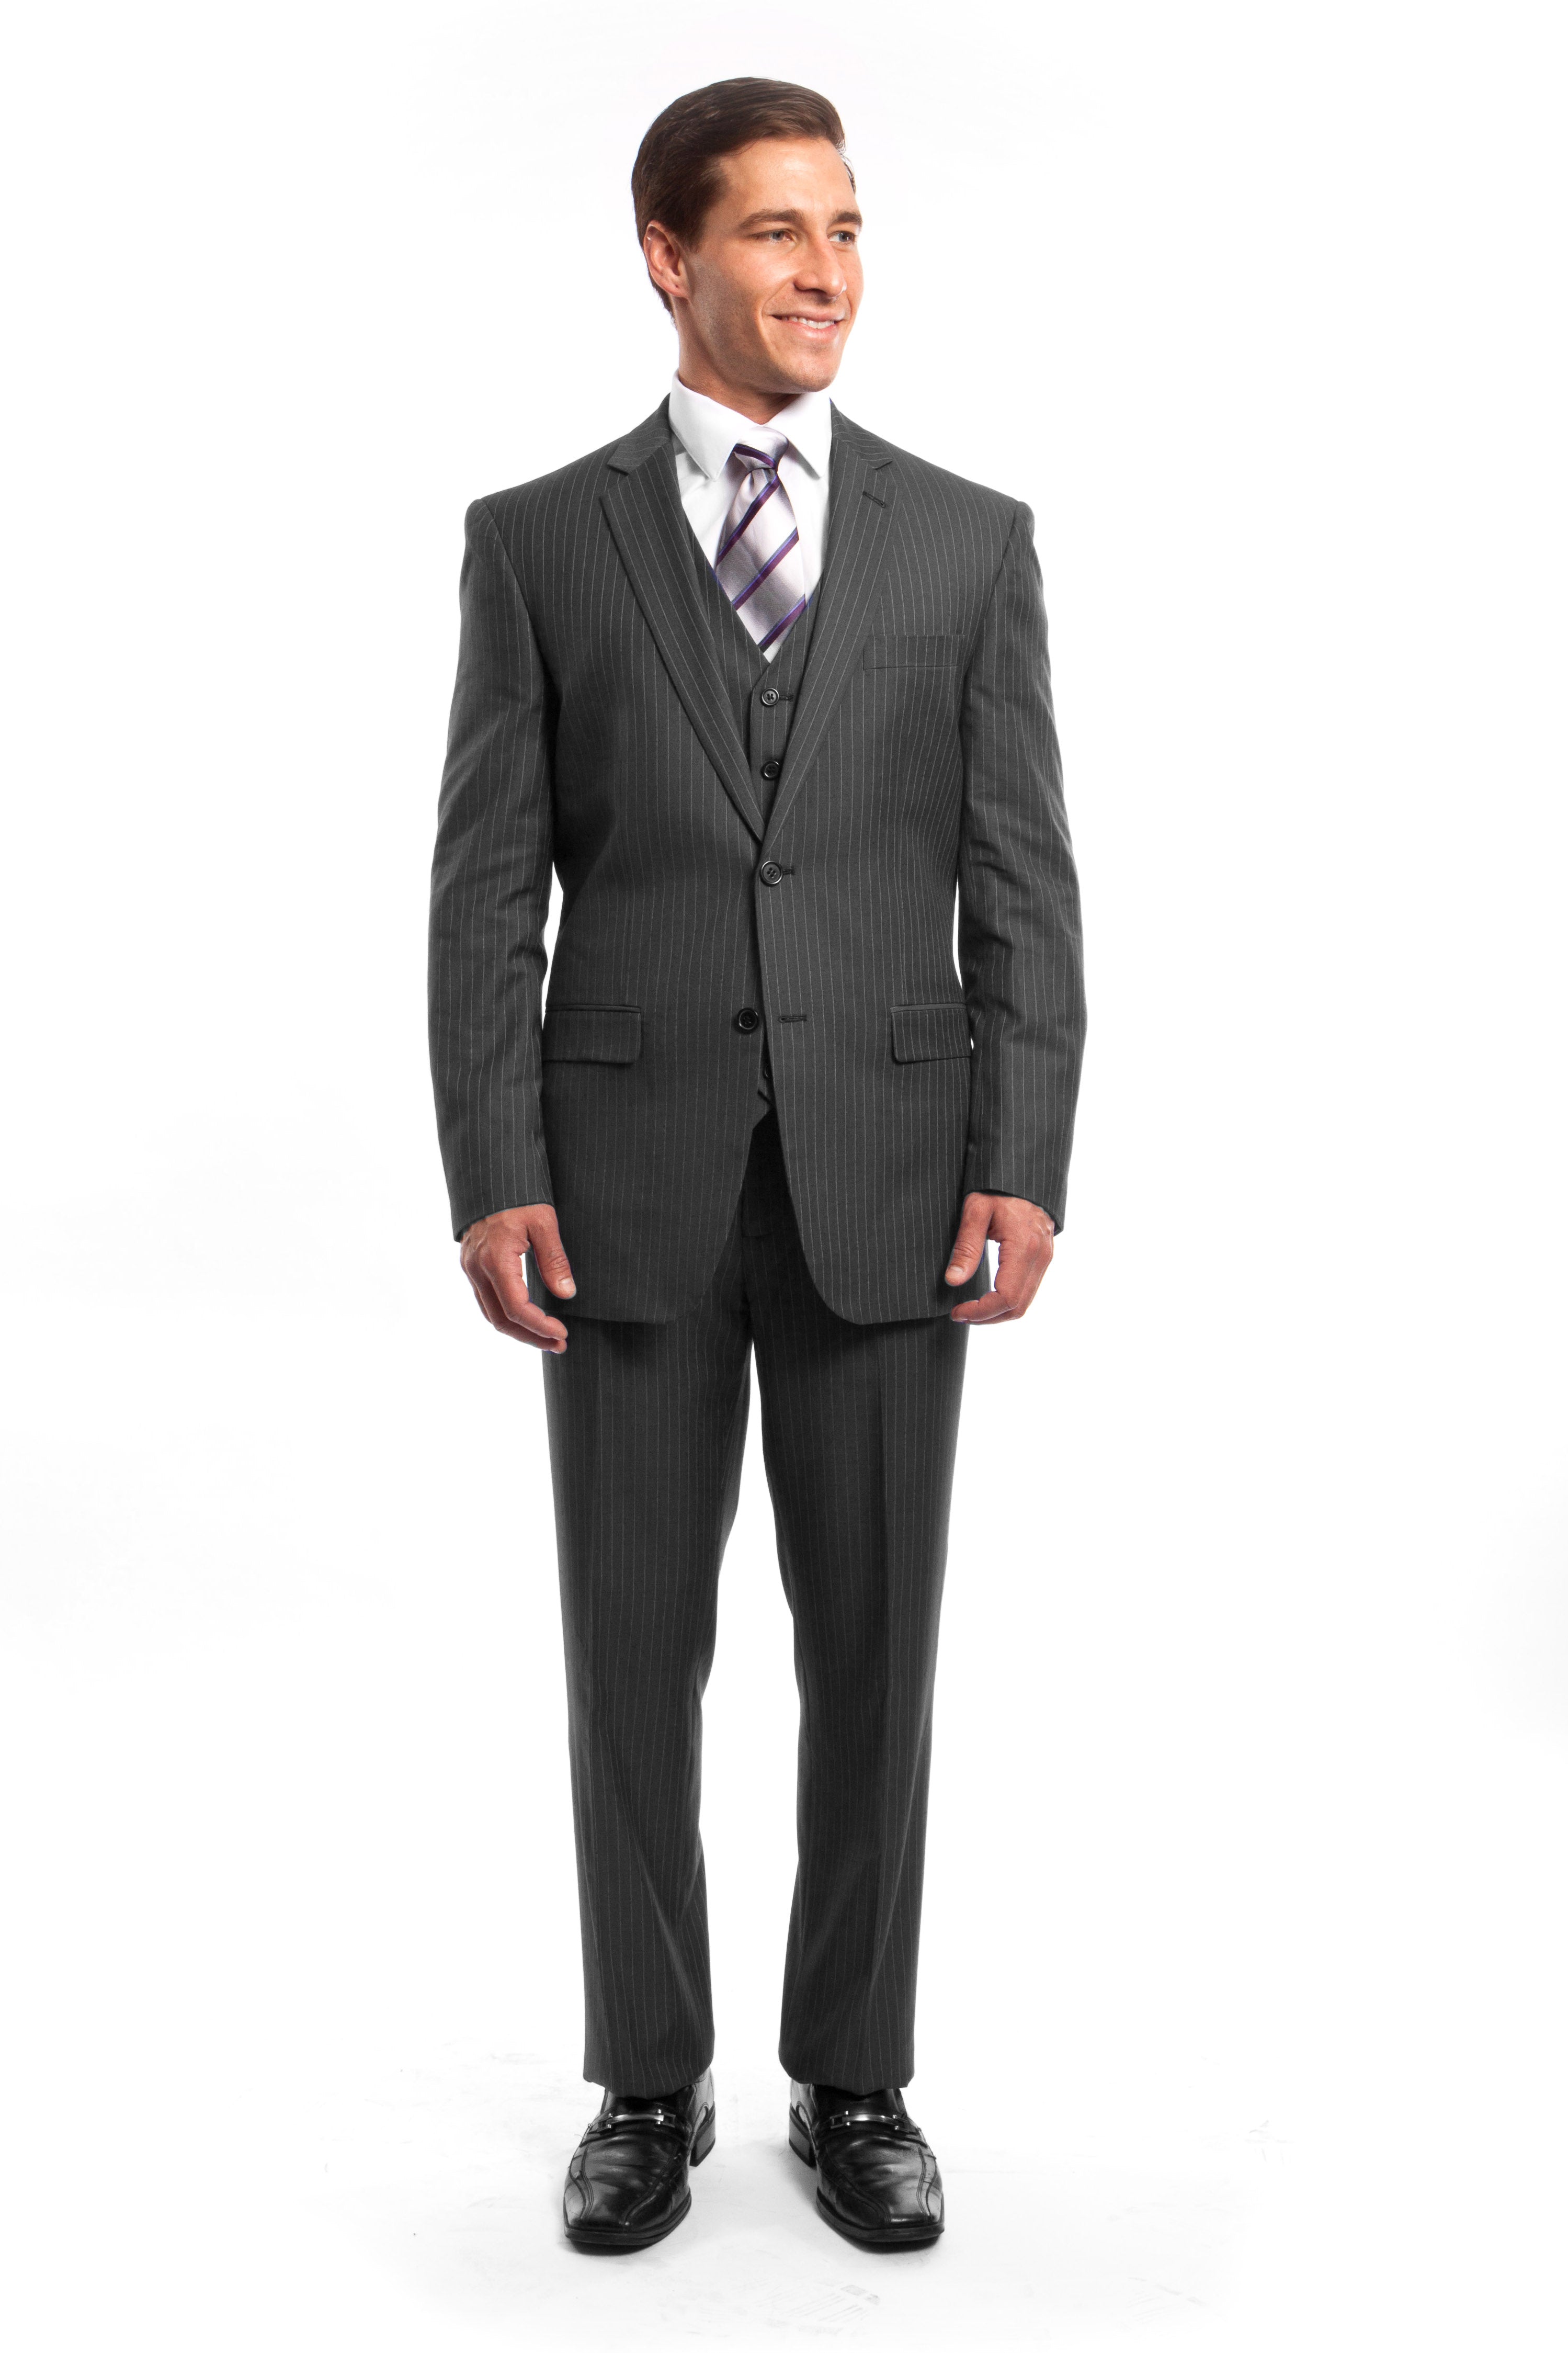 Grey Suit For Men Formal Suits For All Ocassions M120-02